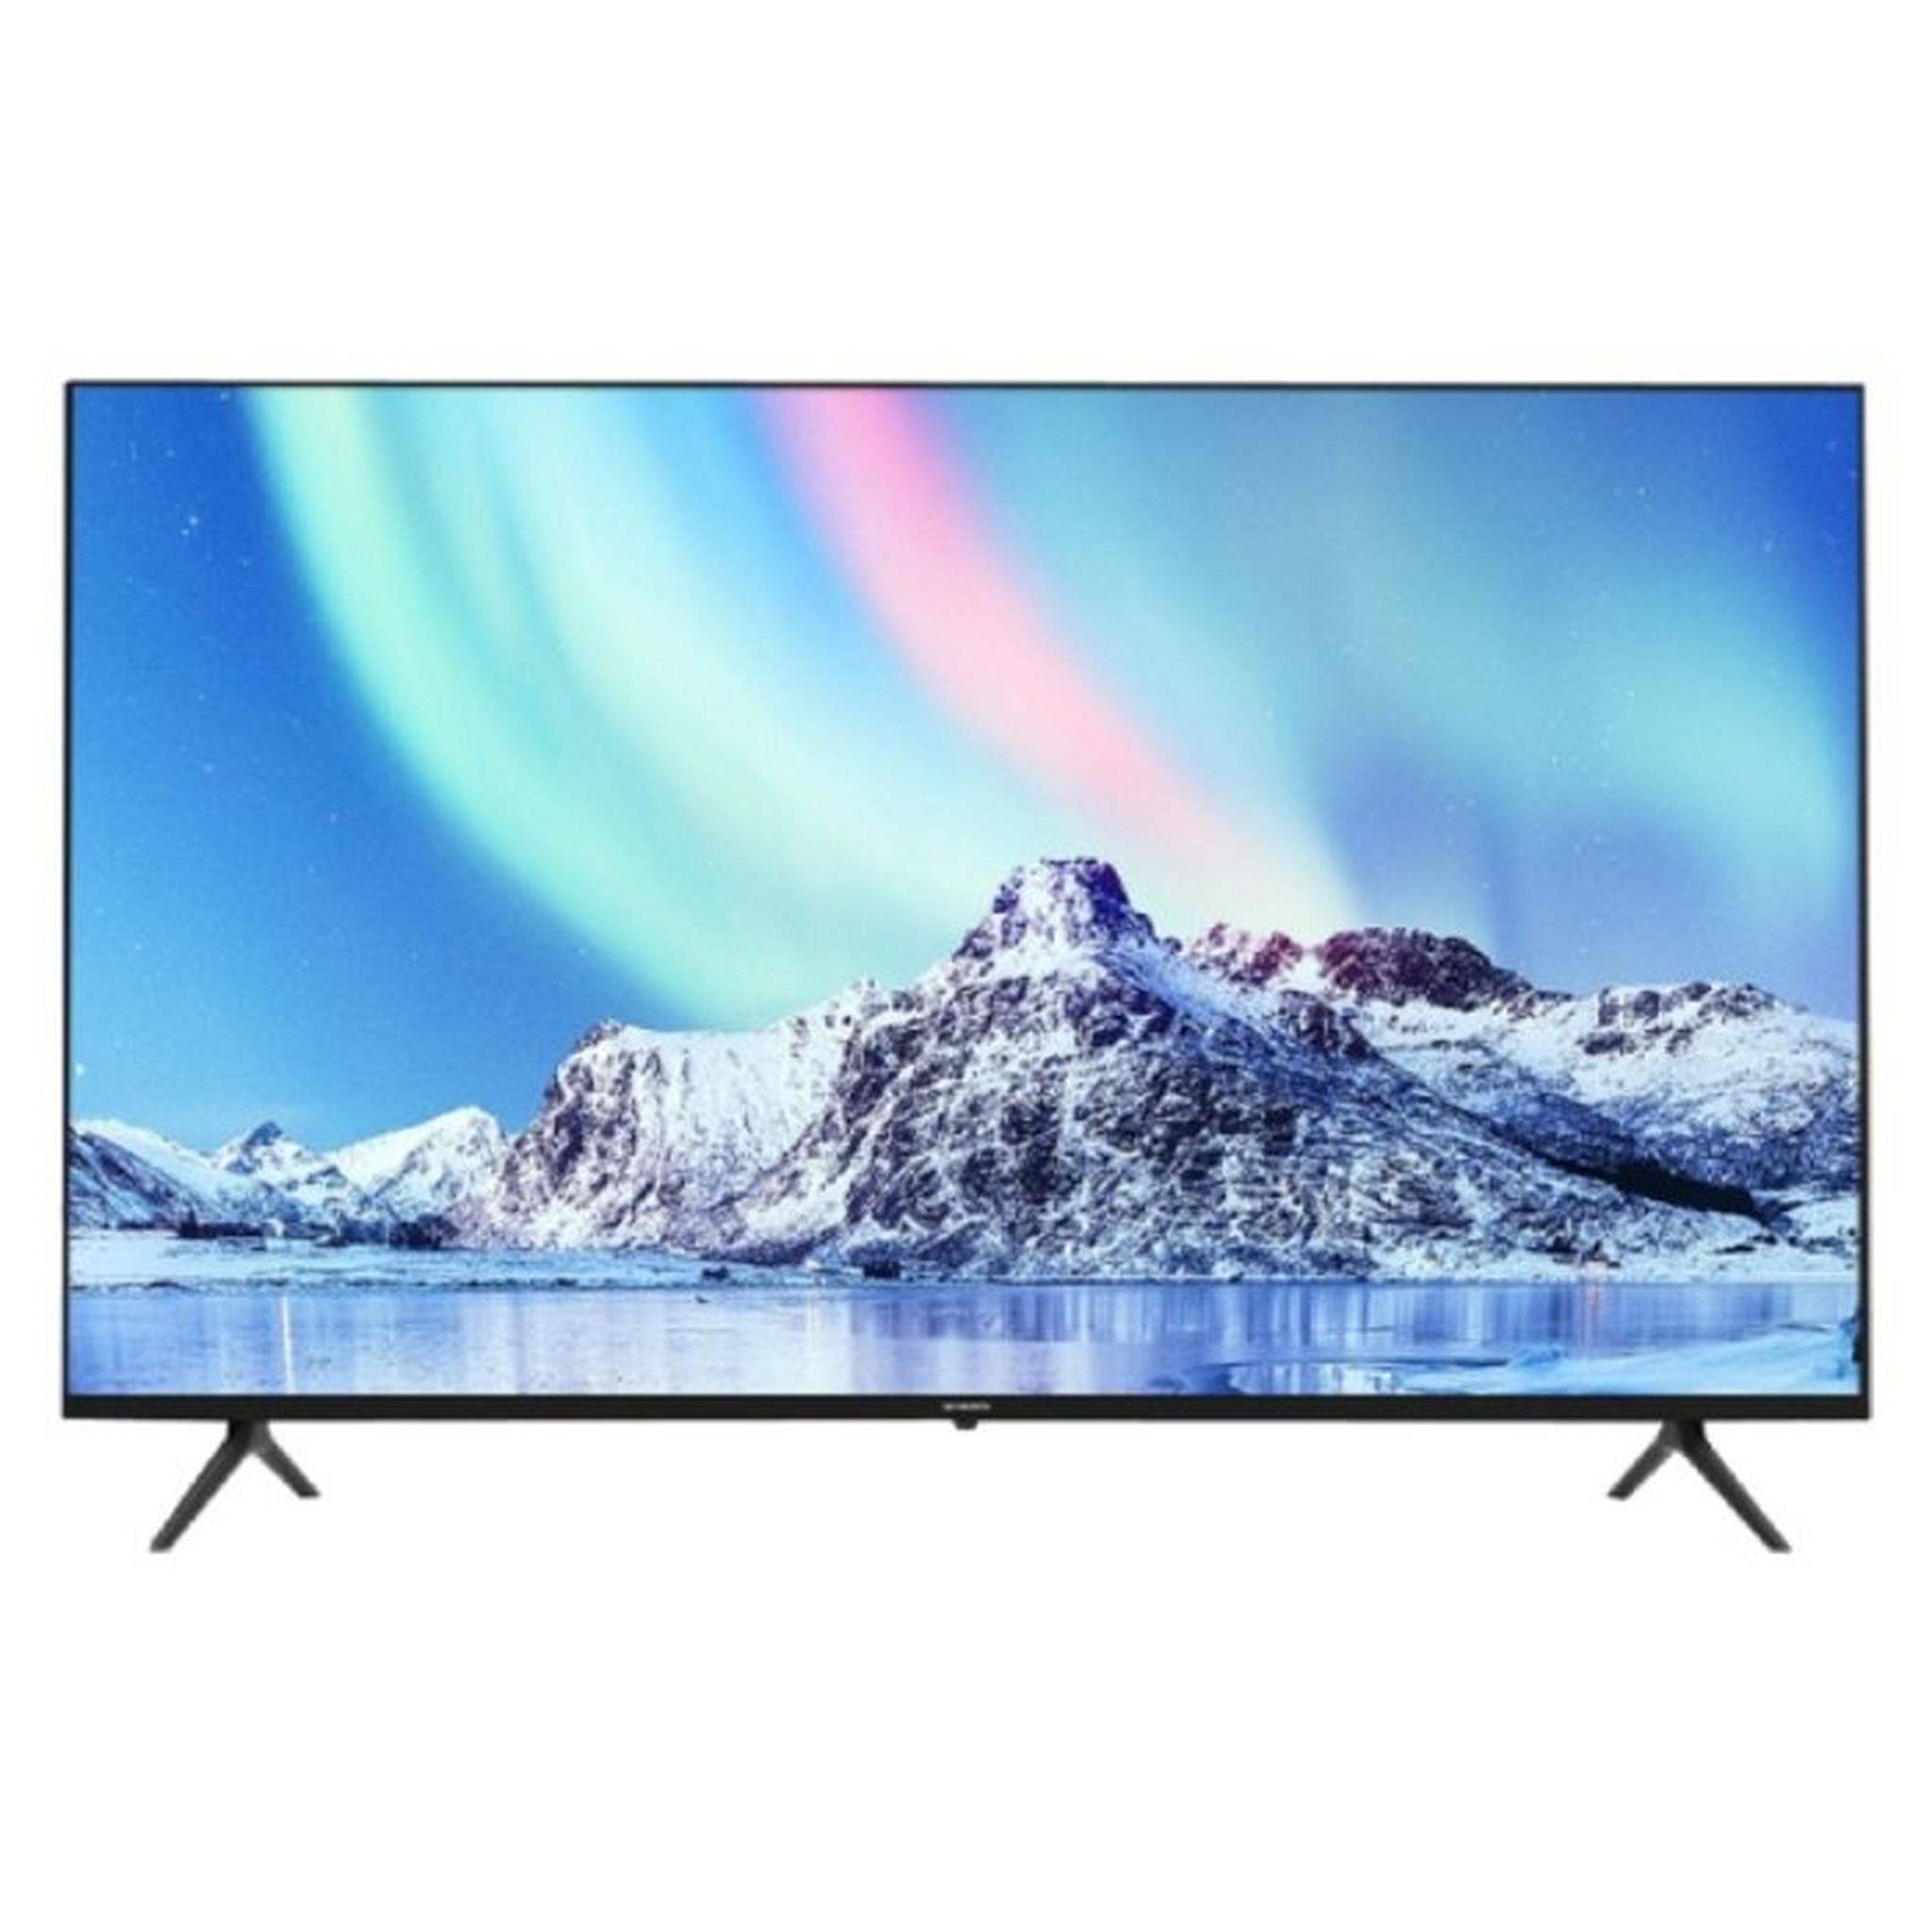 Skyworth 70-inch Android 4K LED TV (70SUC9400)